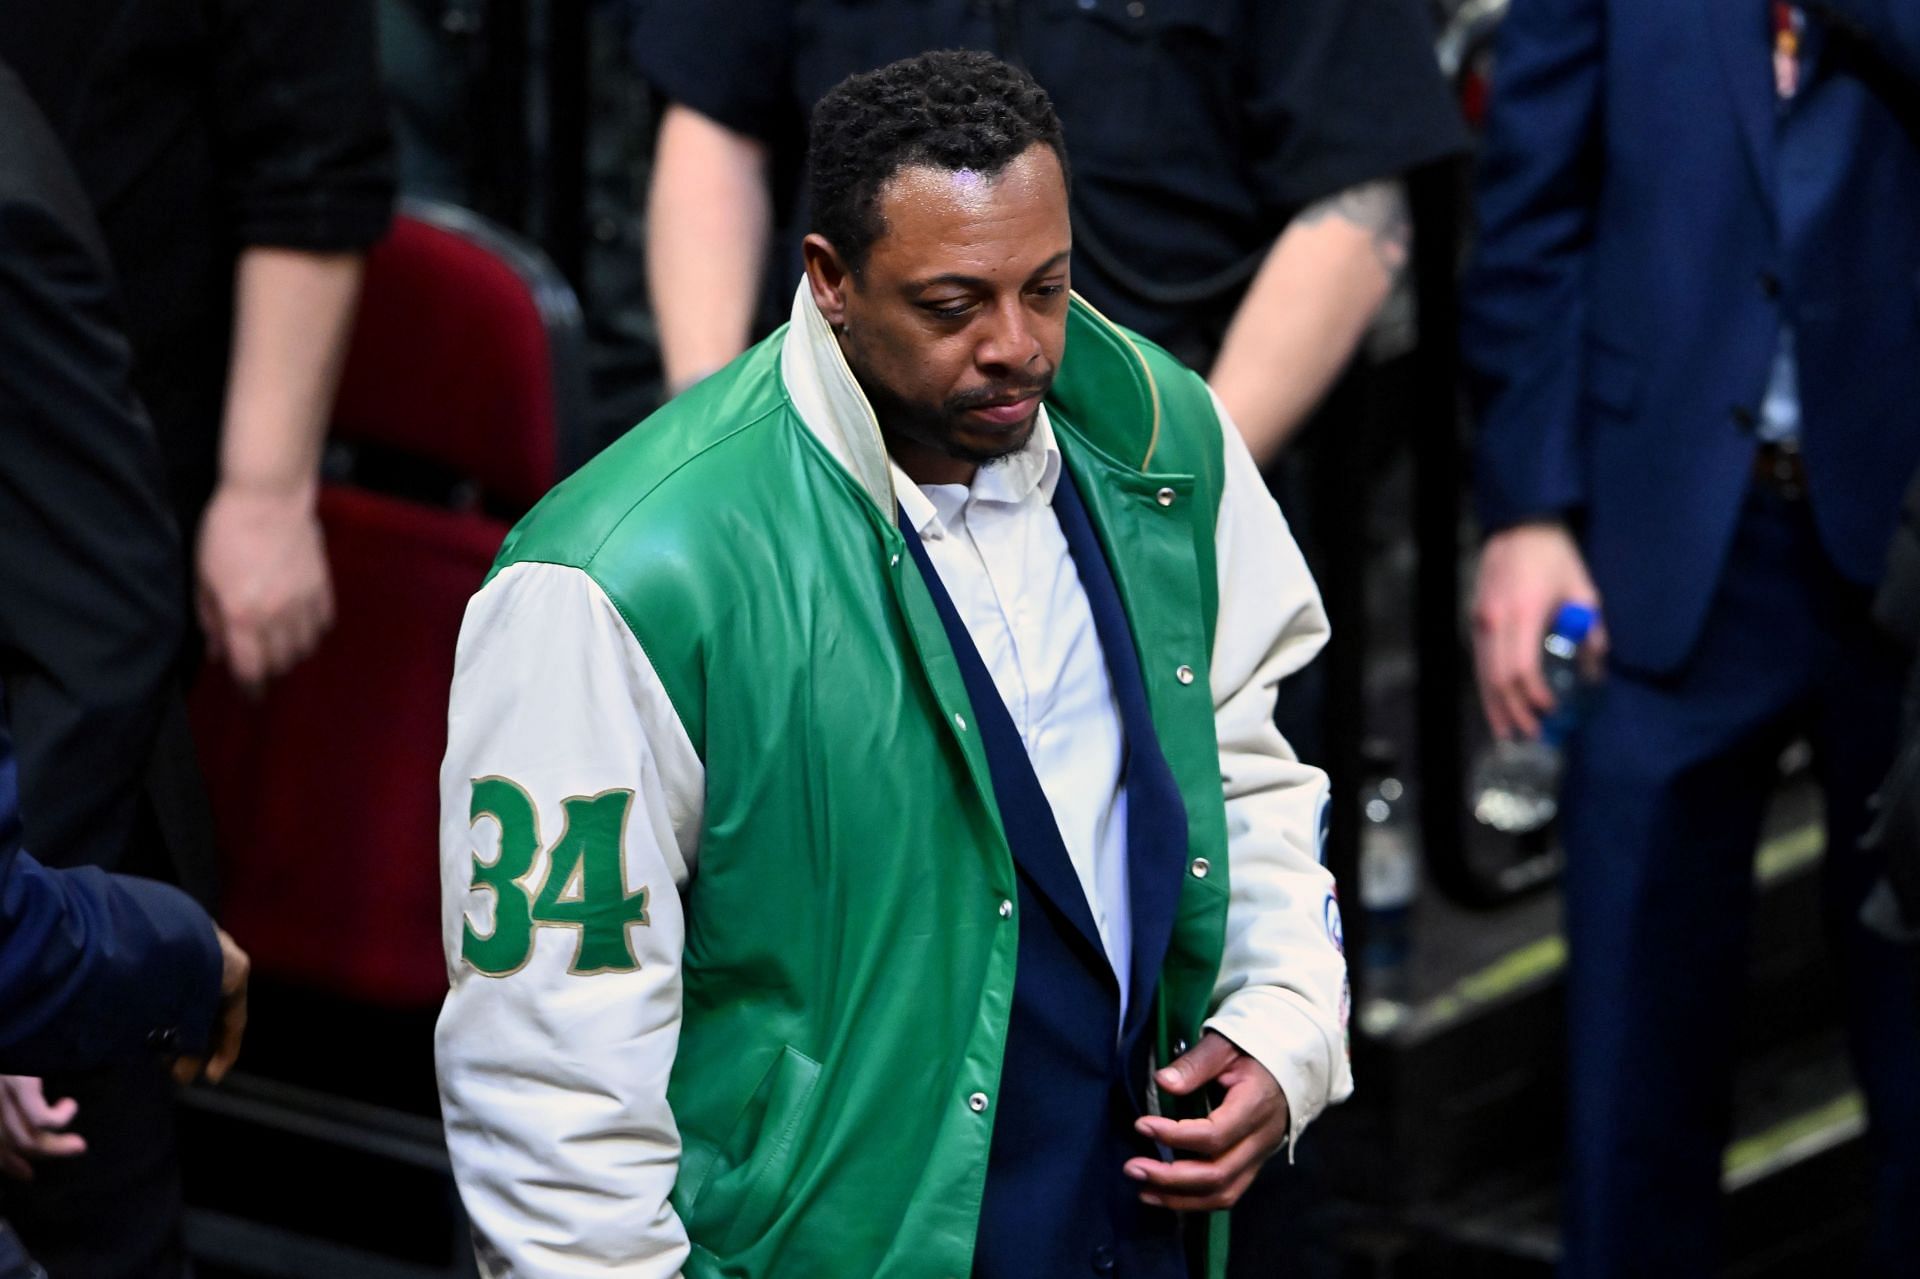 Paul Pierce attends the 2022 NBA All-Star Game